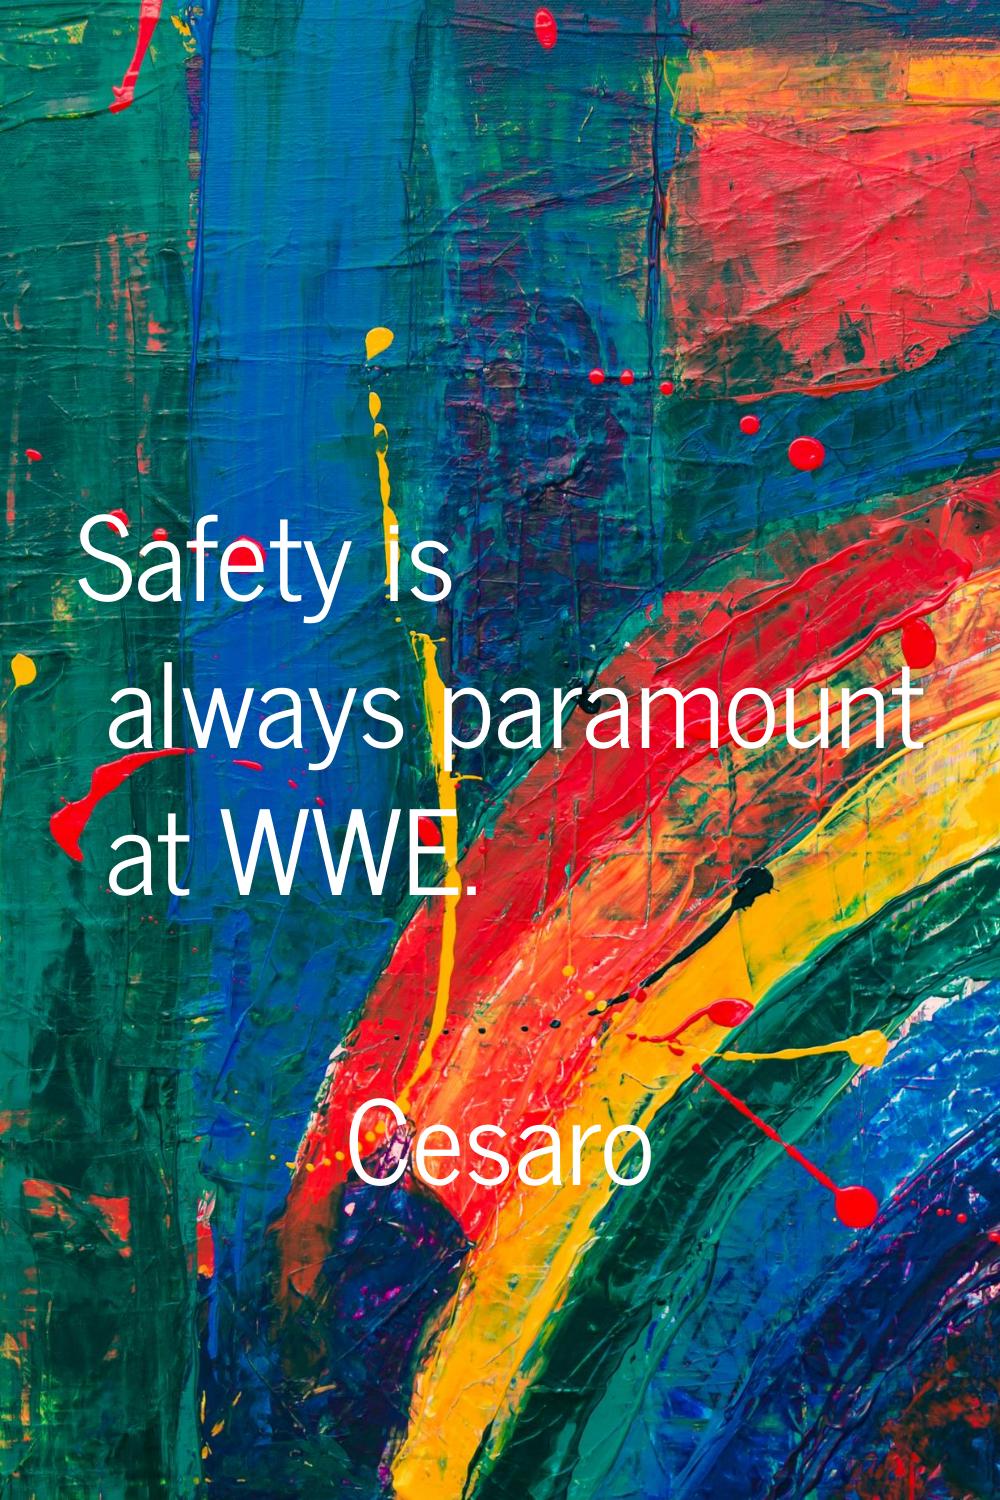 Safety is always paramount at WWE.